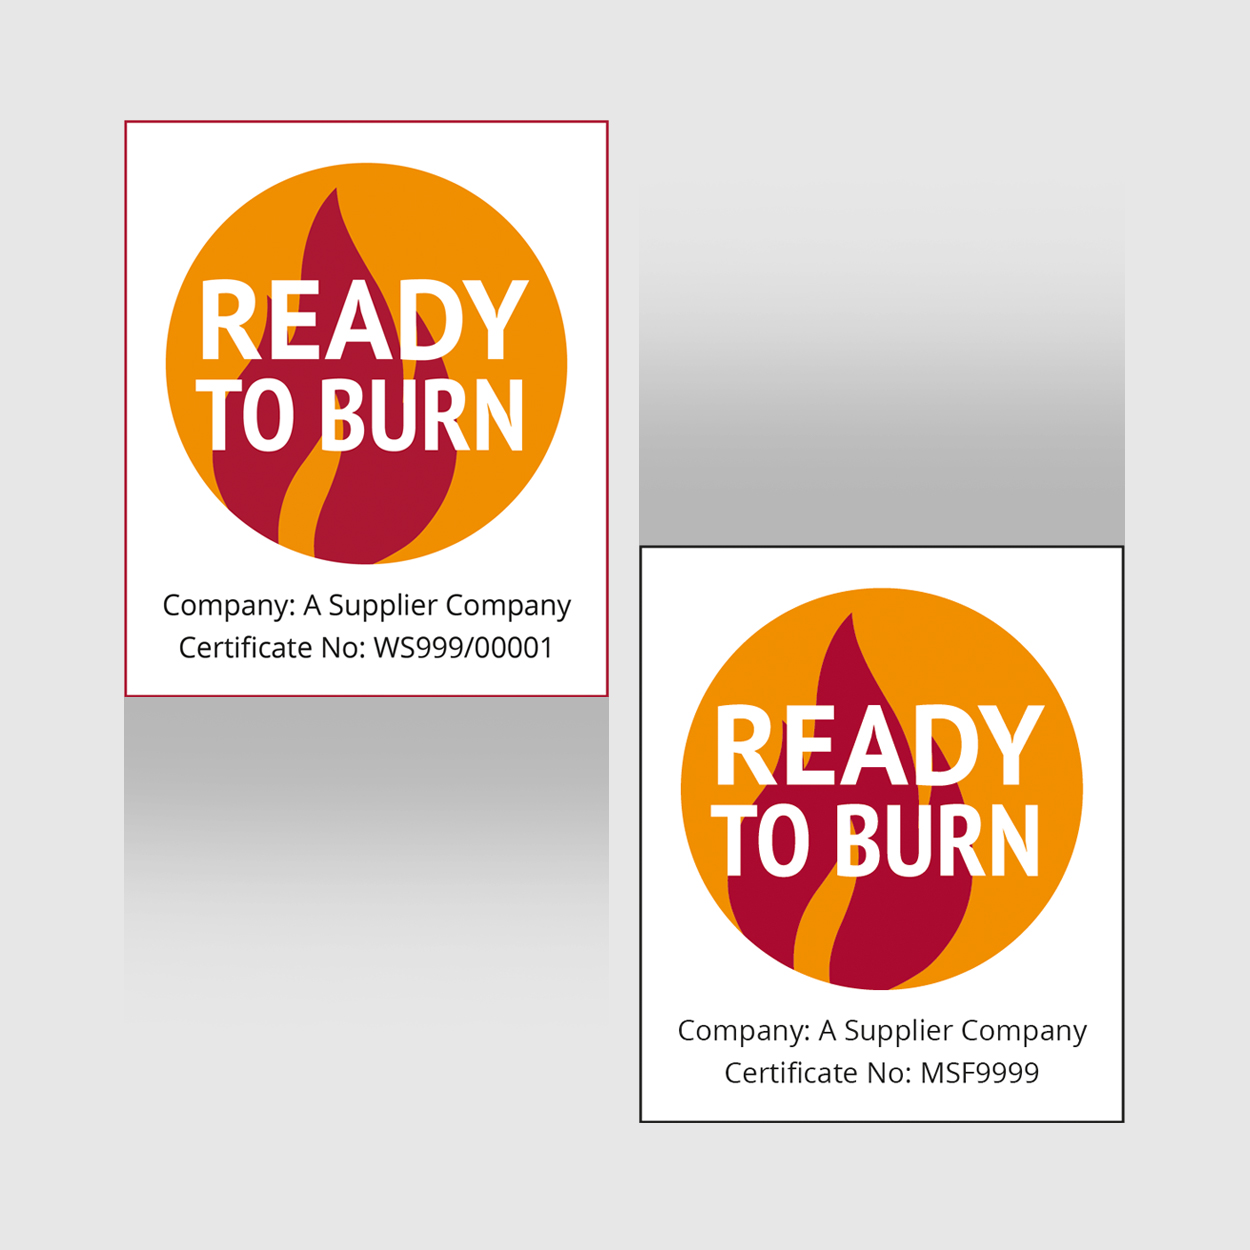 Example Ready to Burn Certification Logos